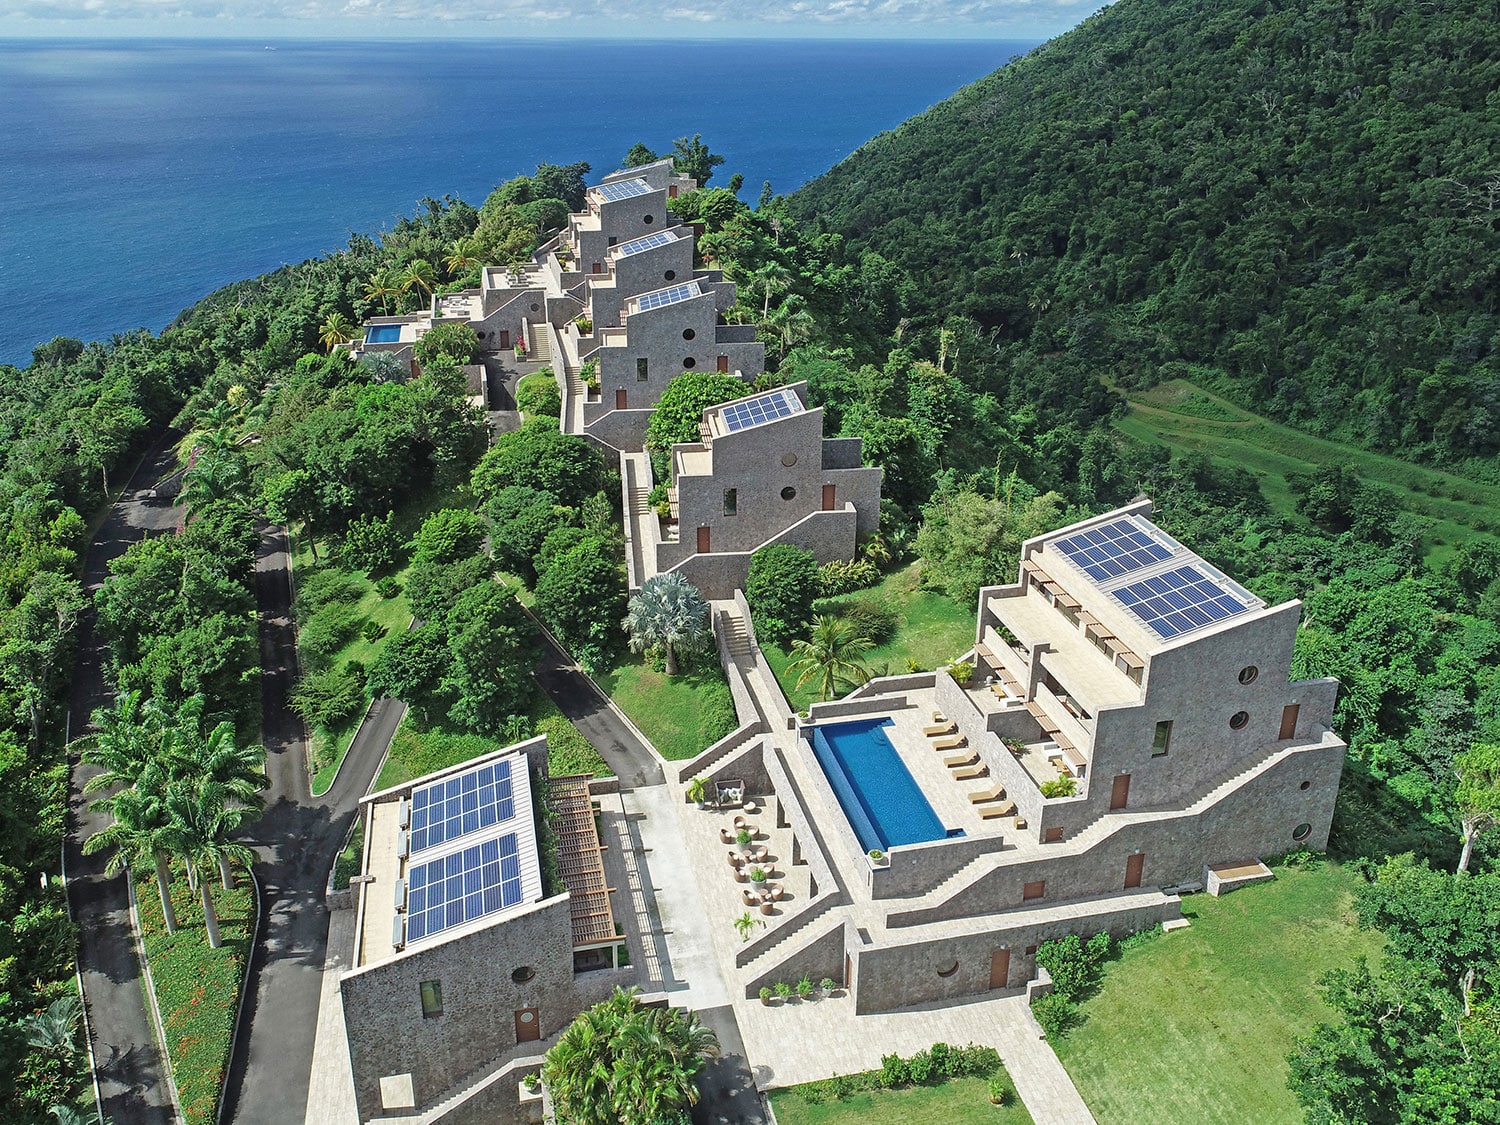 An aerial view of the villas at Coulibri Ridge resort on the Caribbean island of Dominica.